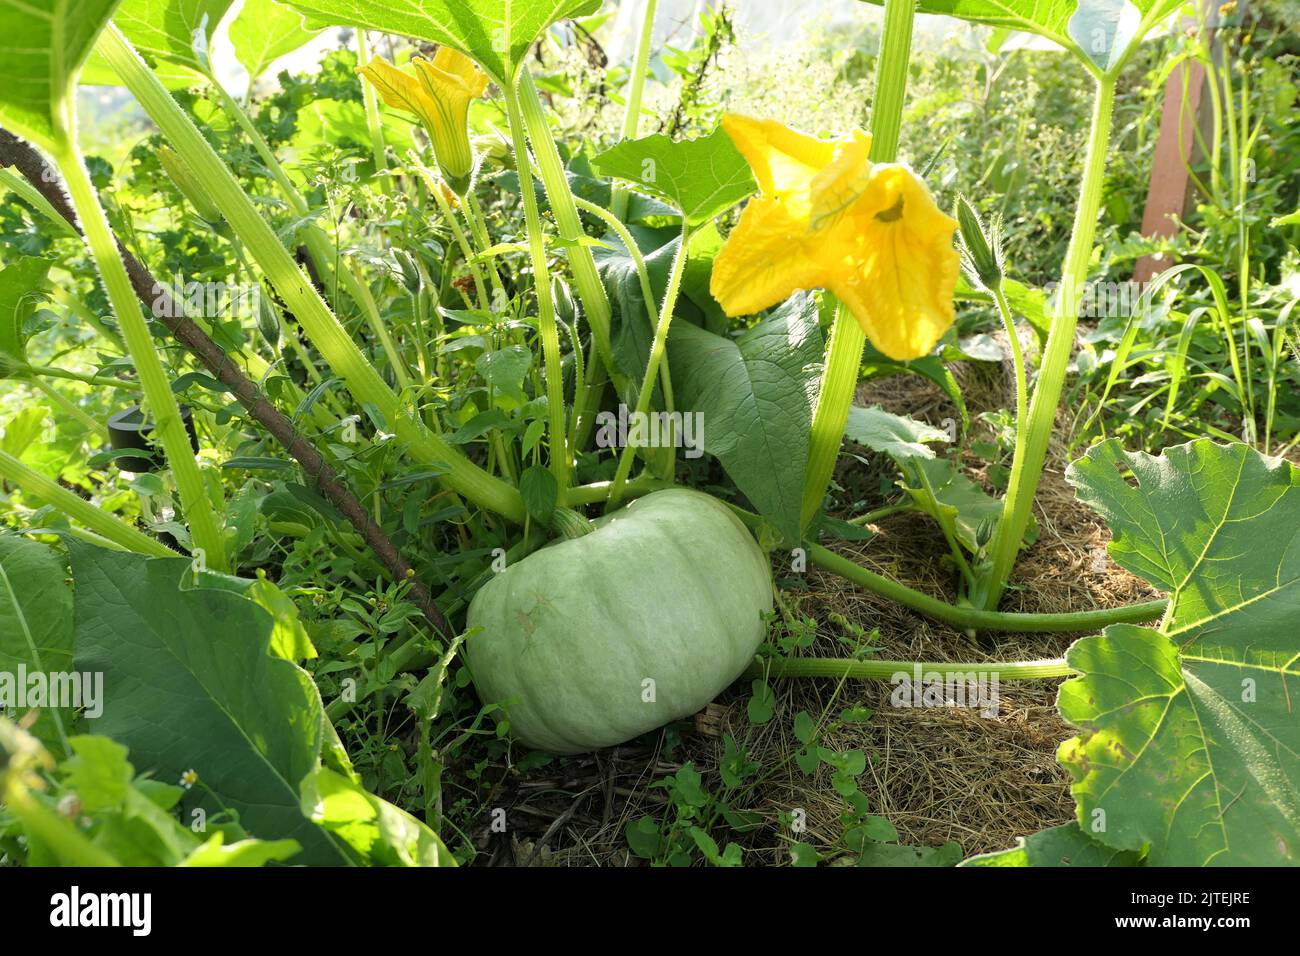 Blue pumpkin growing on the plant in the garden. Stock Photo